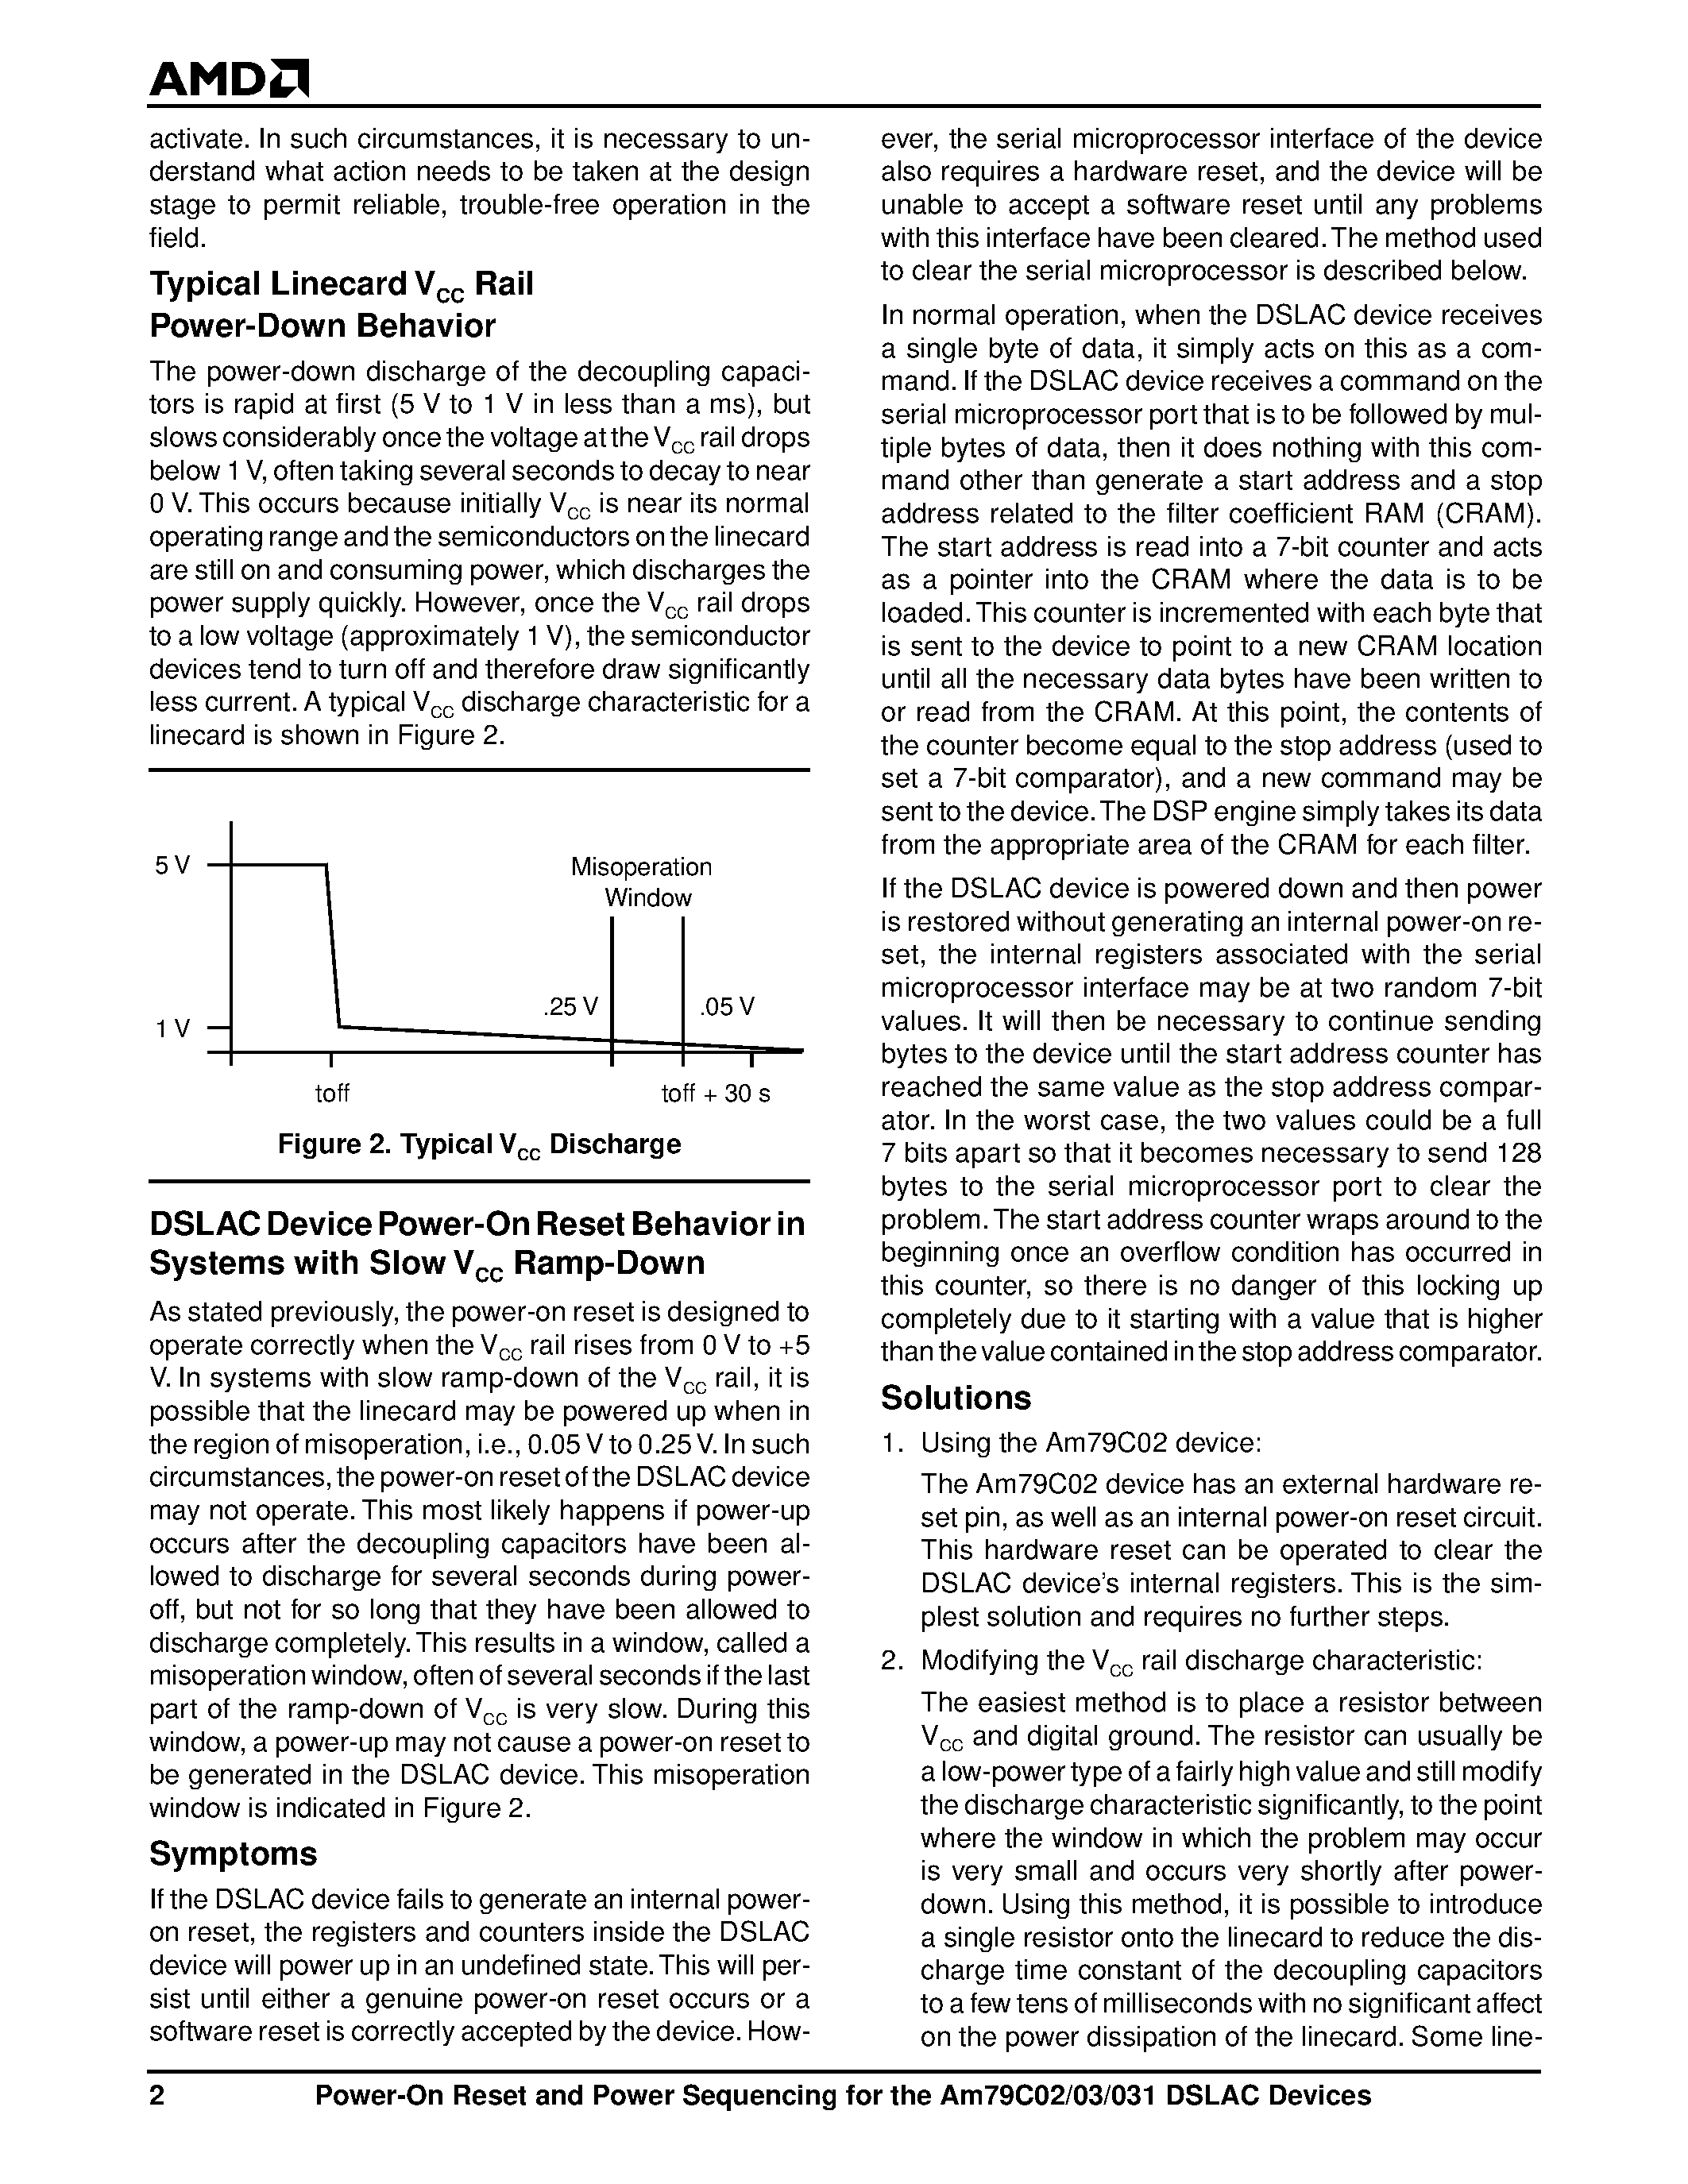 Datasheet AM79C02 - (AM79C02/03/031) Power-On Reset and Power Sequencing page 2